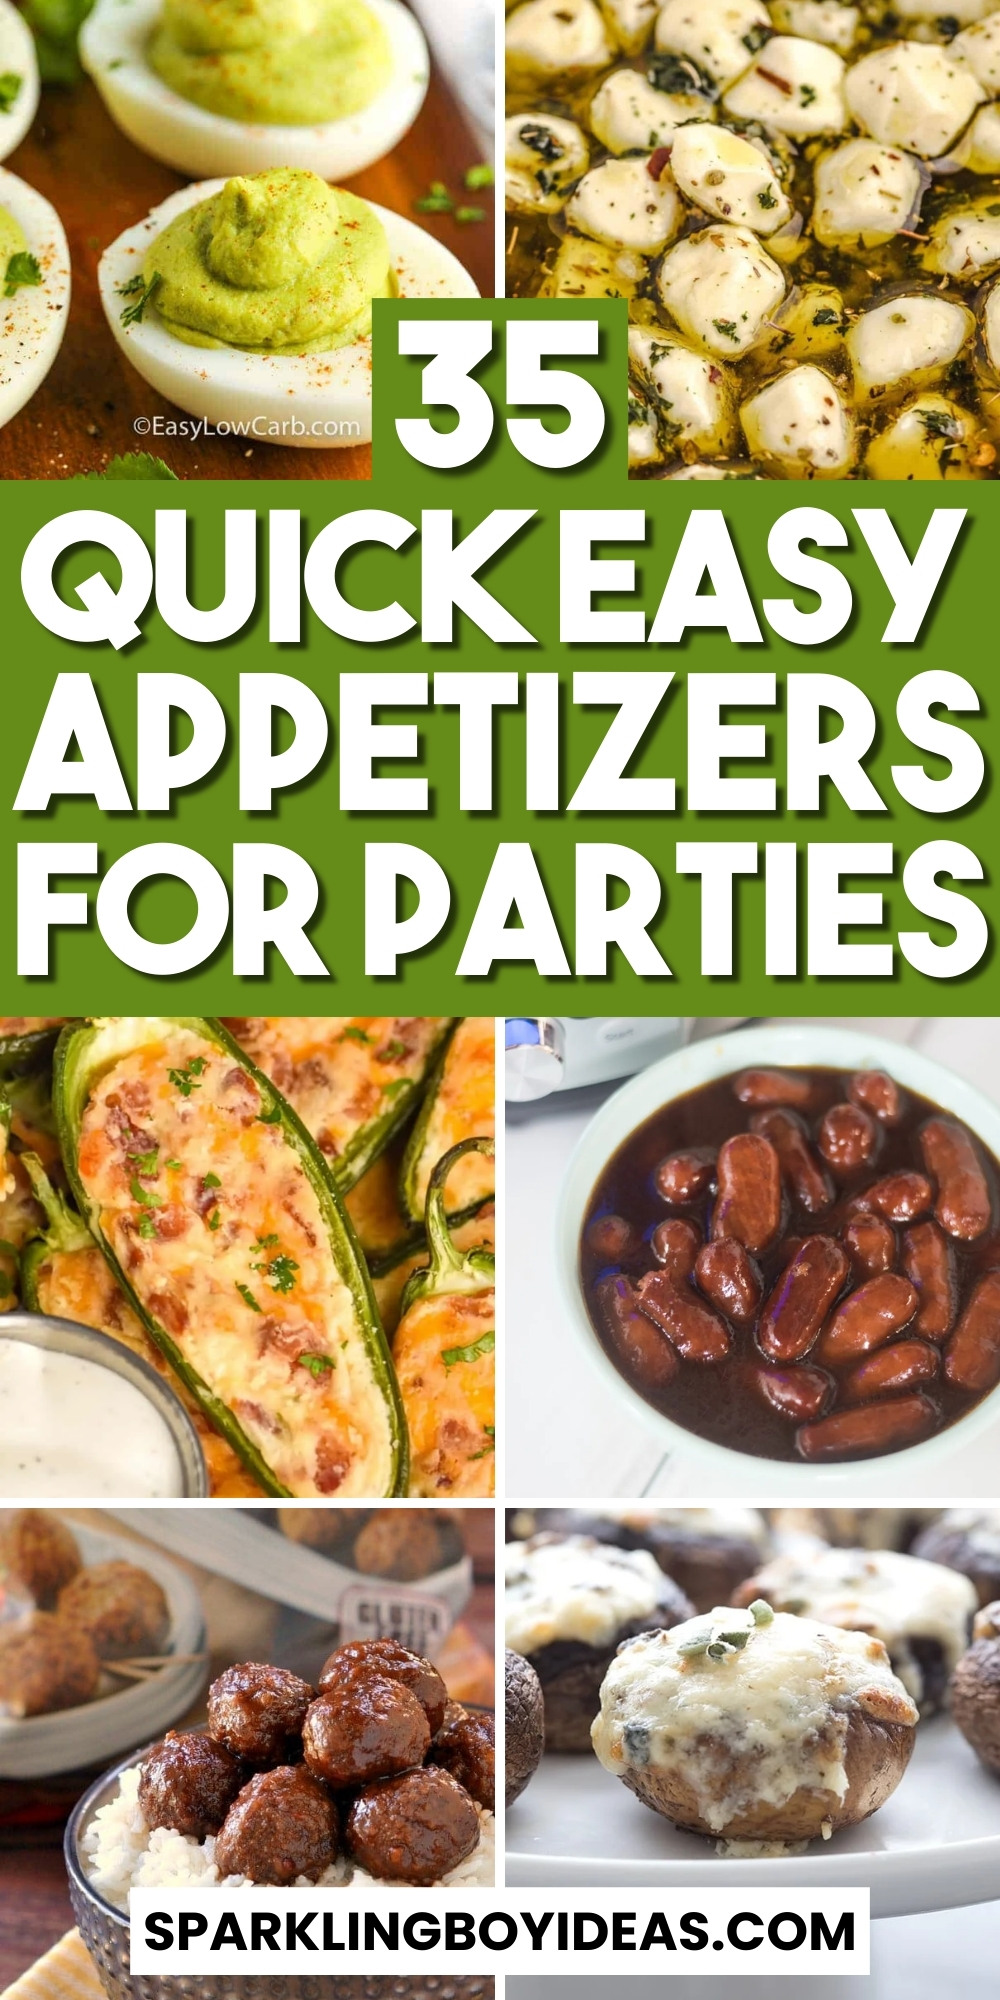 35 Easy Party Appetizers - Sparkling Boy Ideas